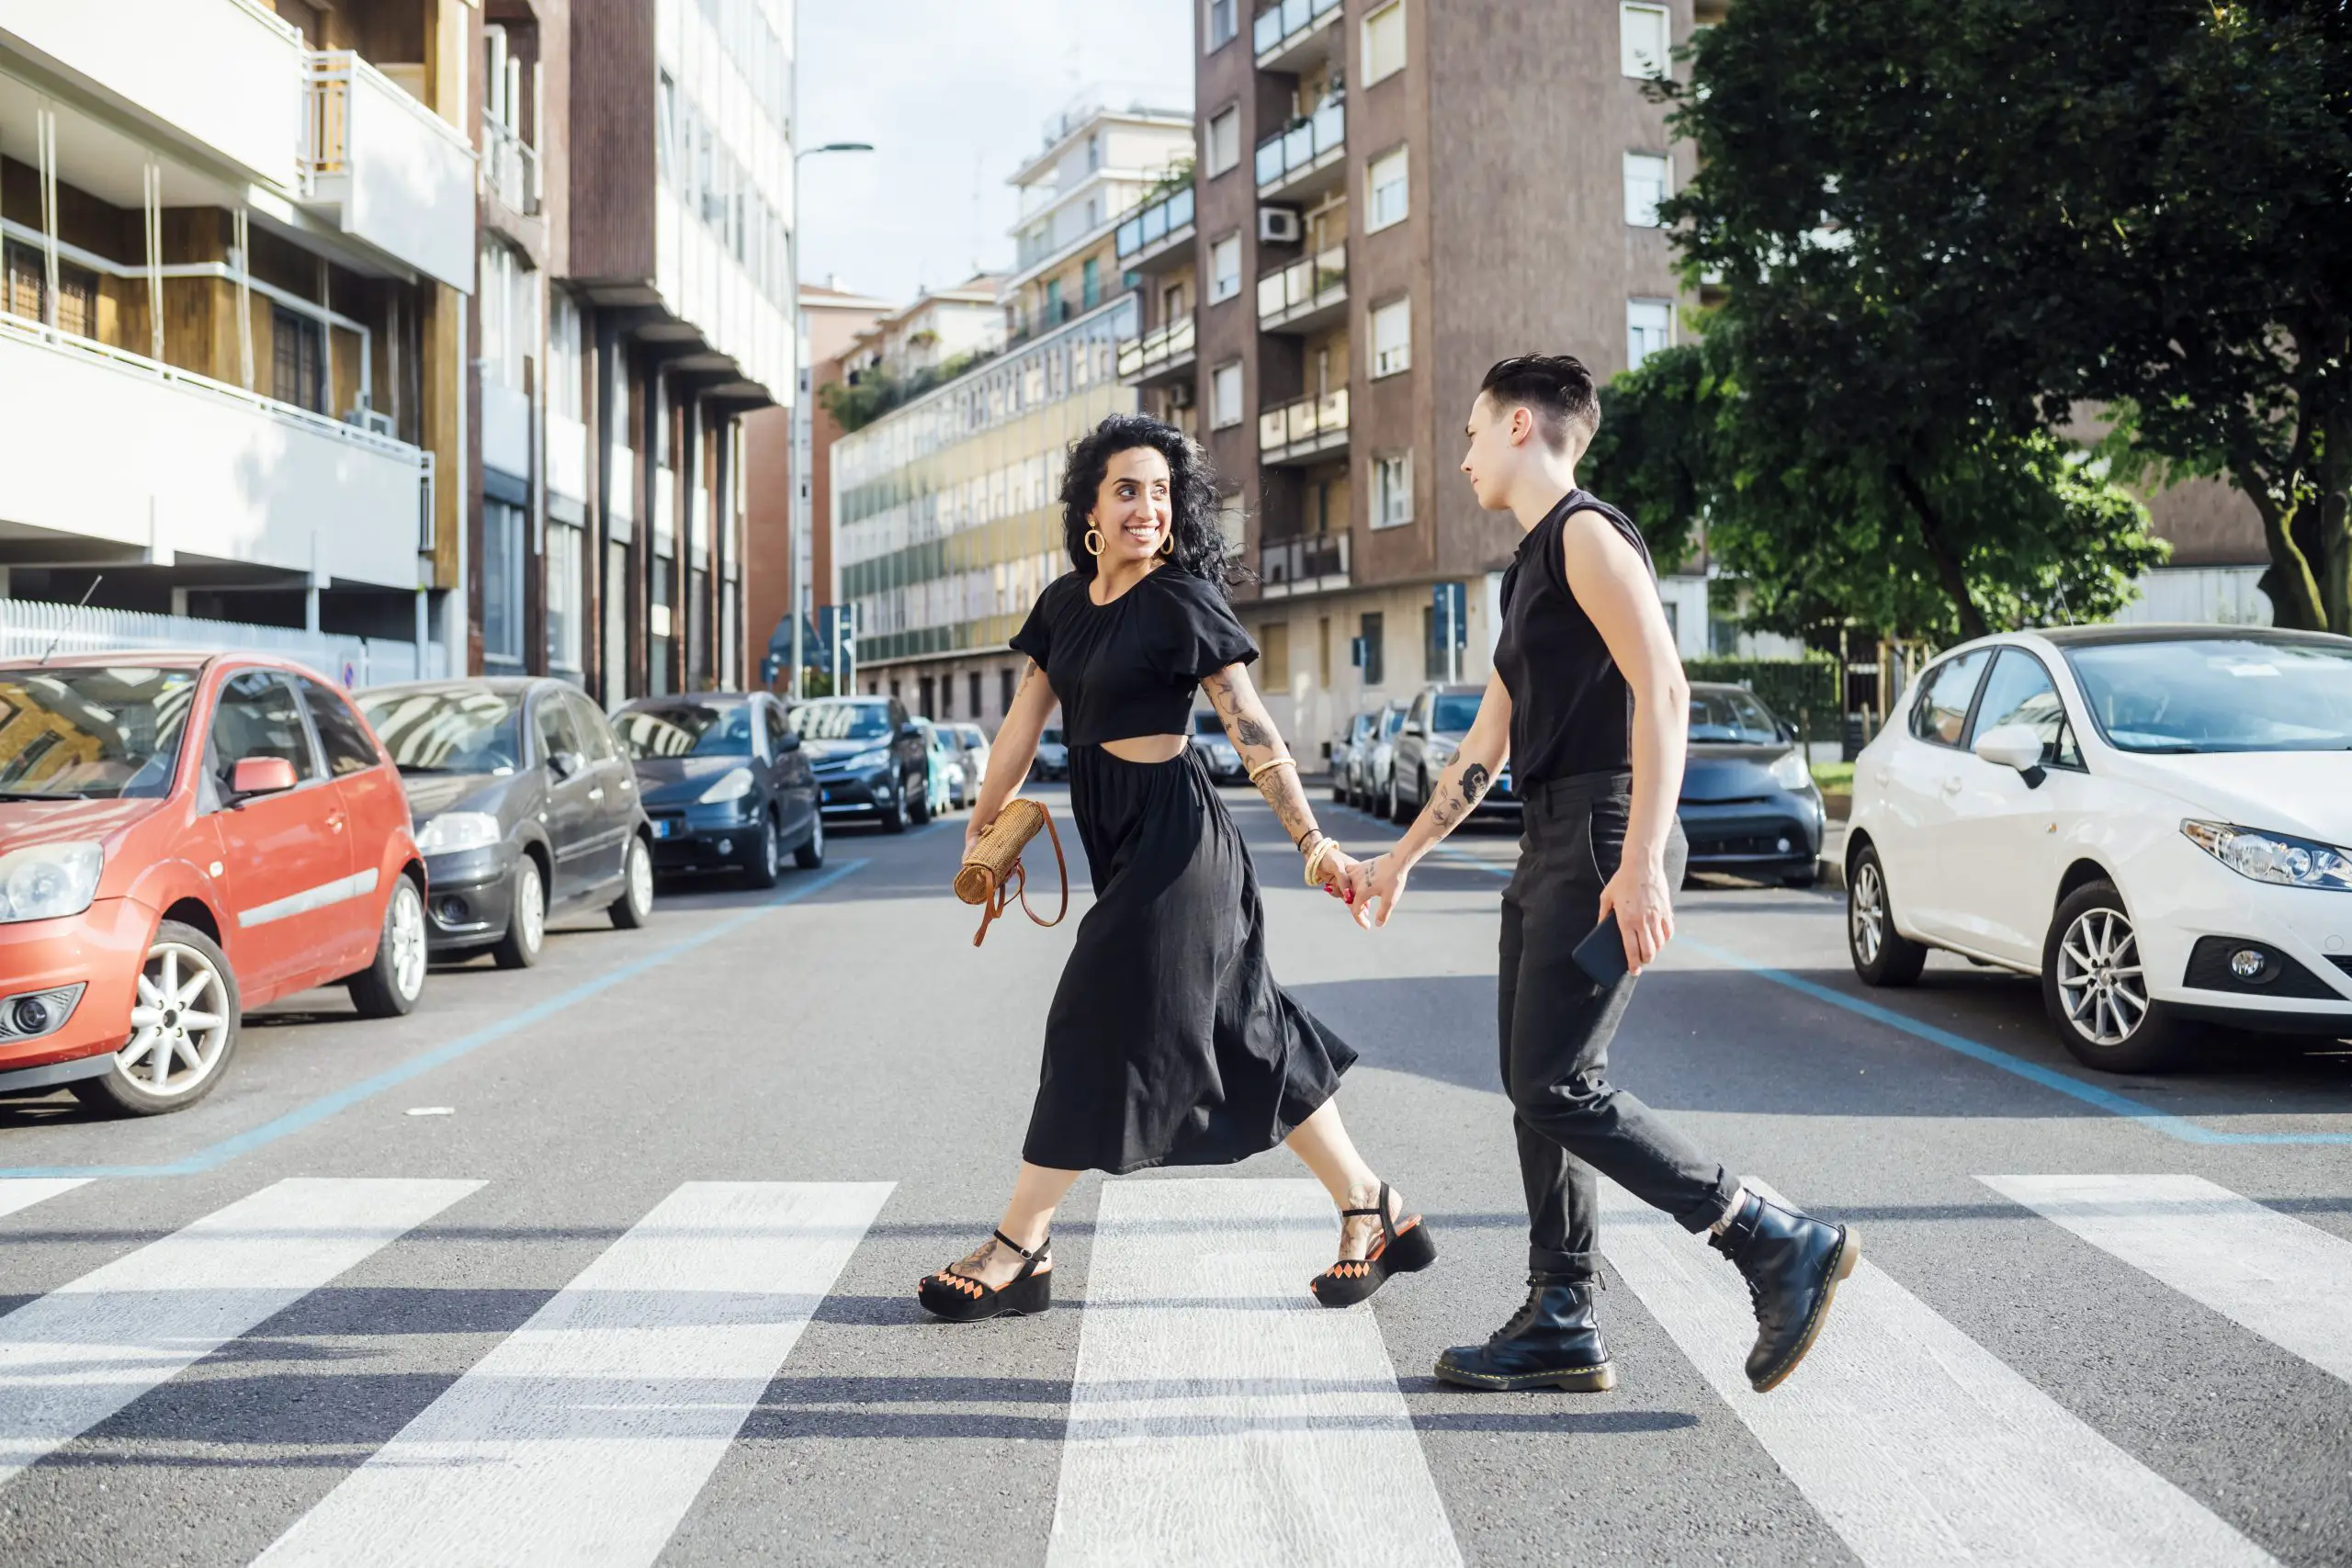 Cute couple in black crossing the road with zebra crossing, holding hands.